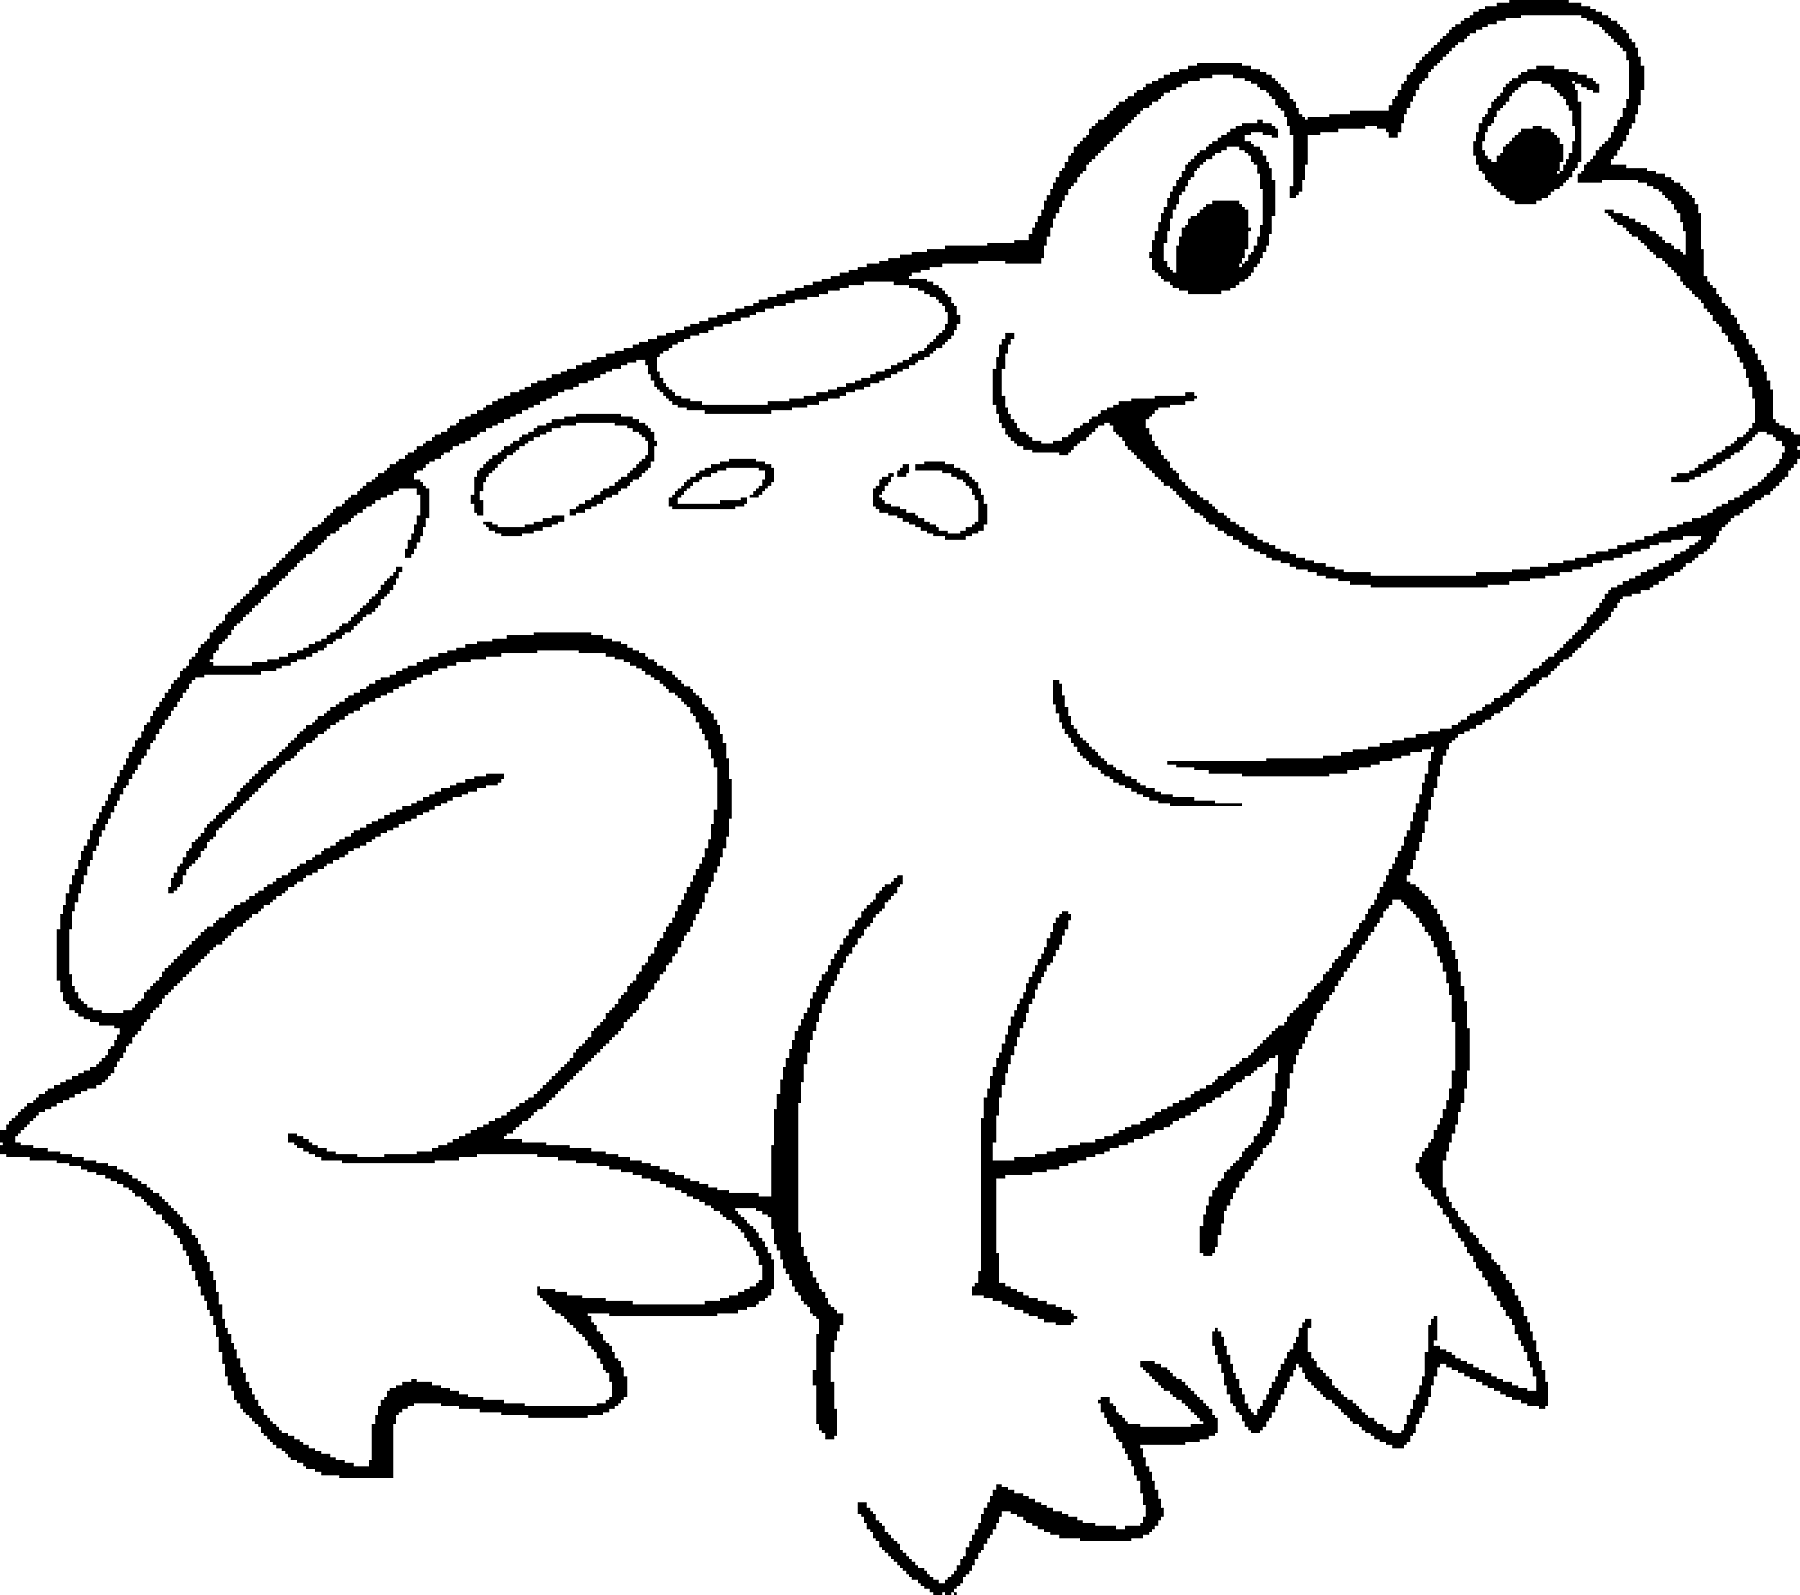 White Frog Coloring Page